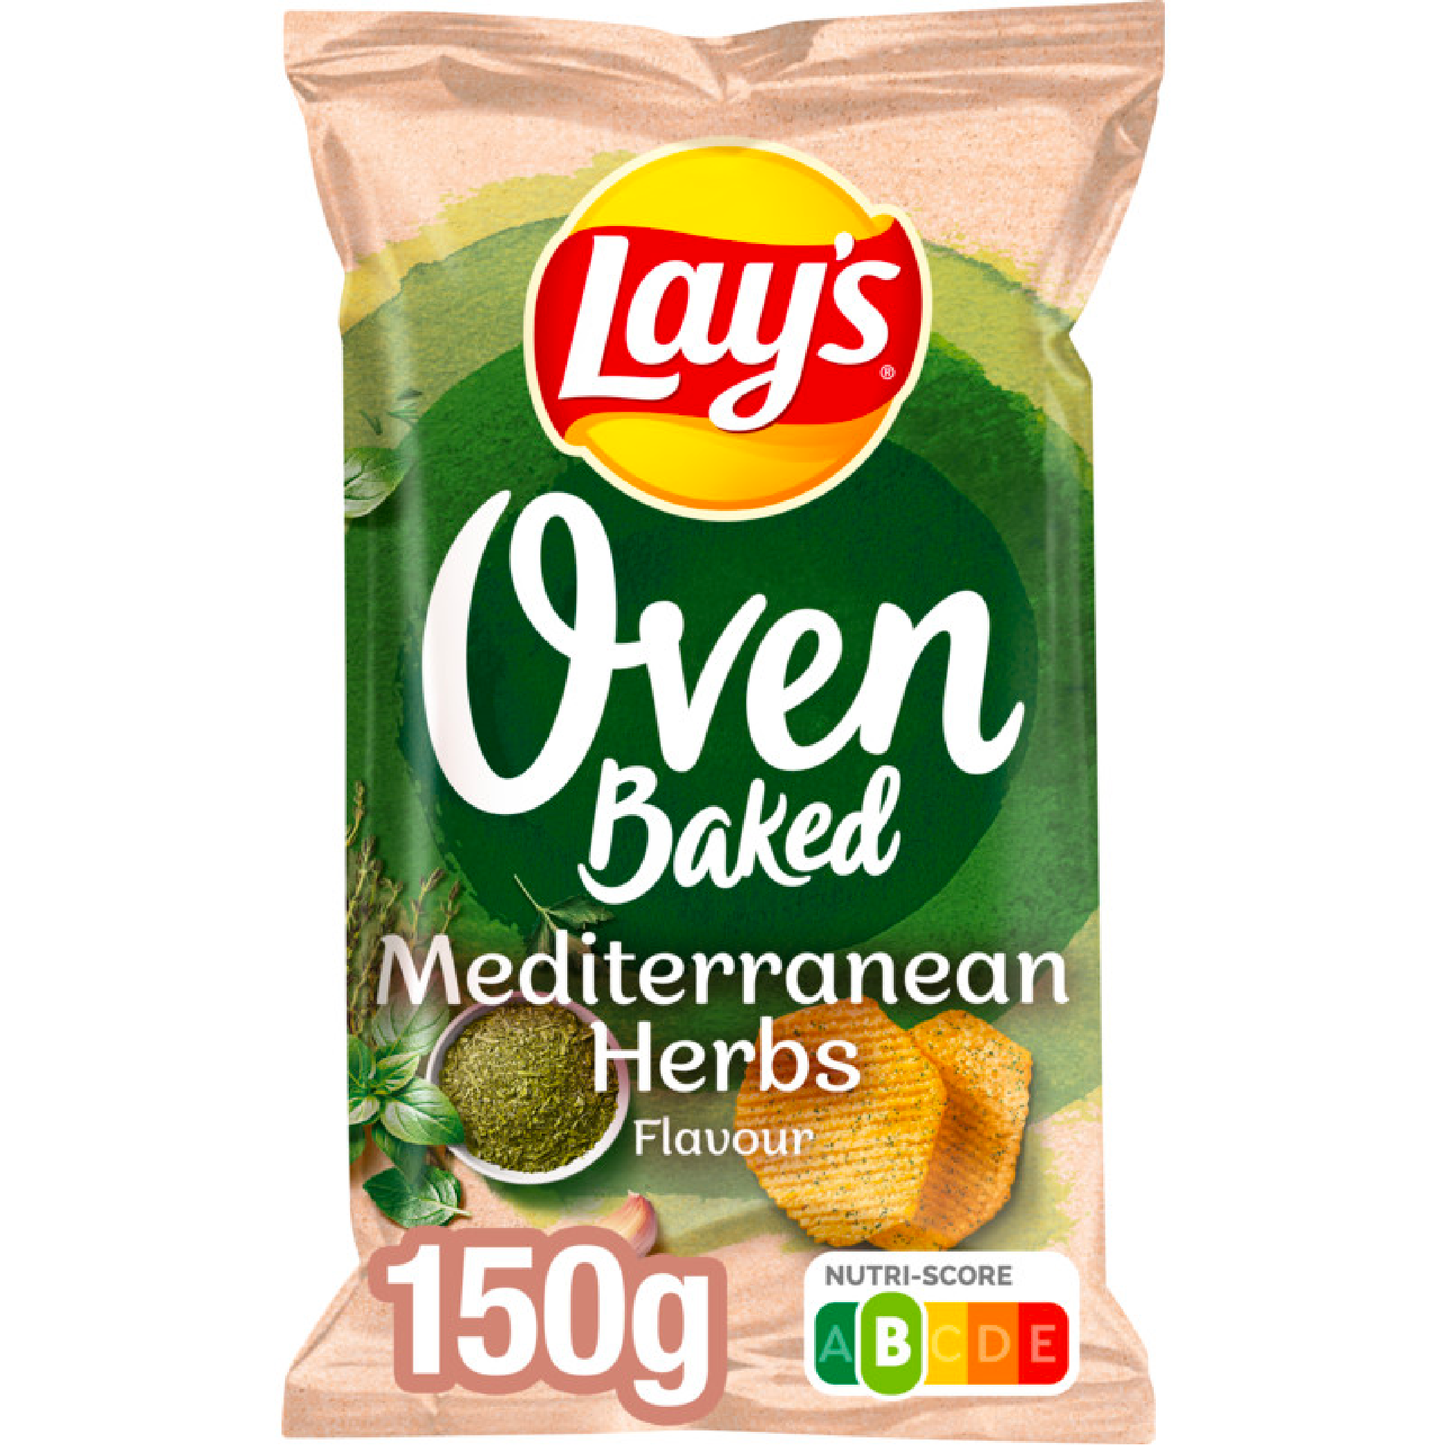 Lay's Oven Baked Mediterranean Herbs 150g - Snack-It